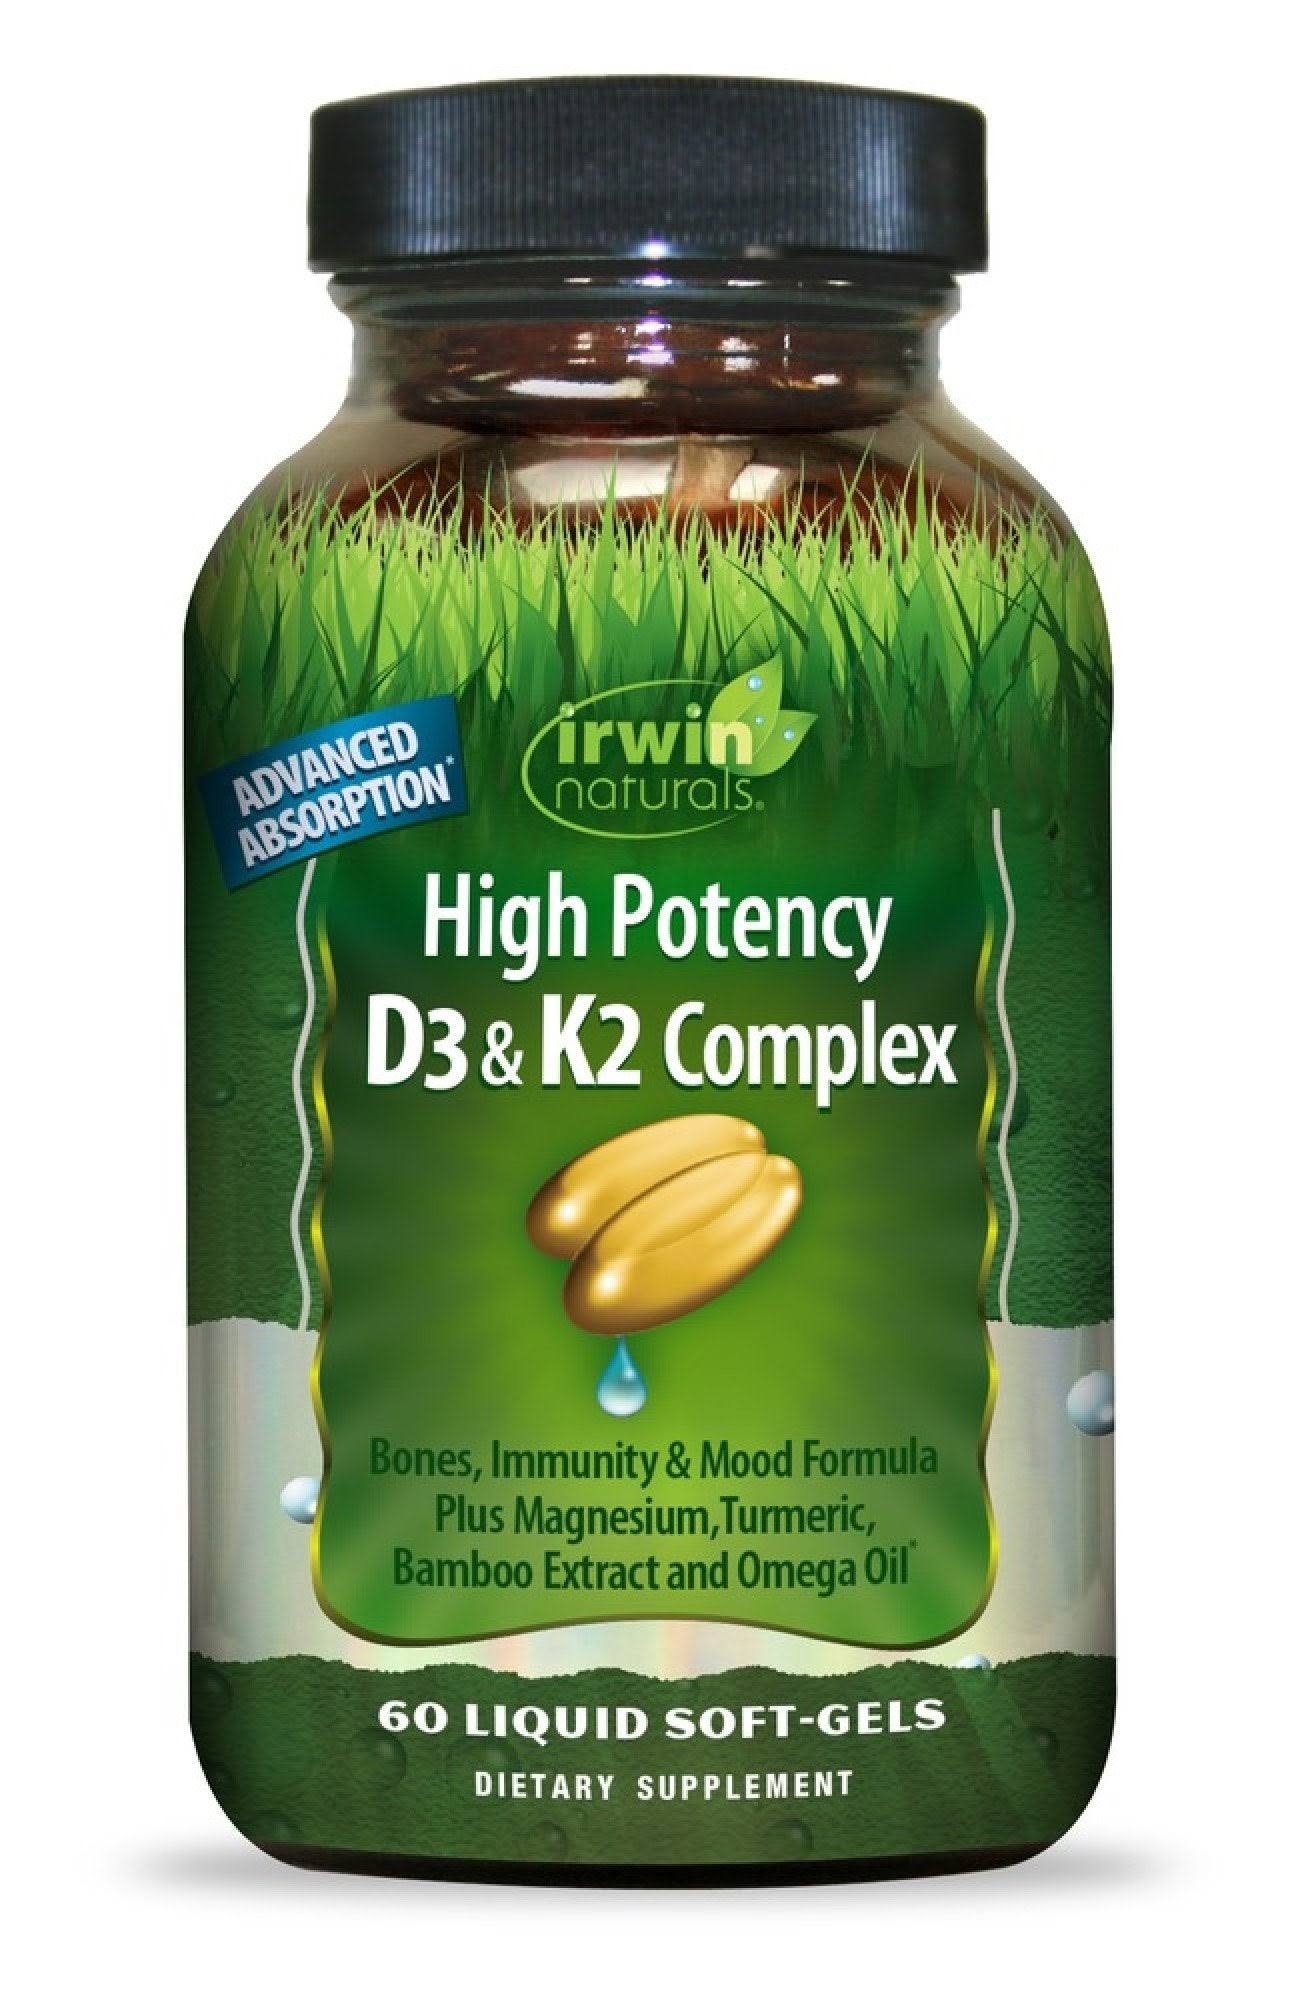 Irwin Naturals High Potency D3 and K2 Complex Dietary Supplement - 60ct